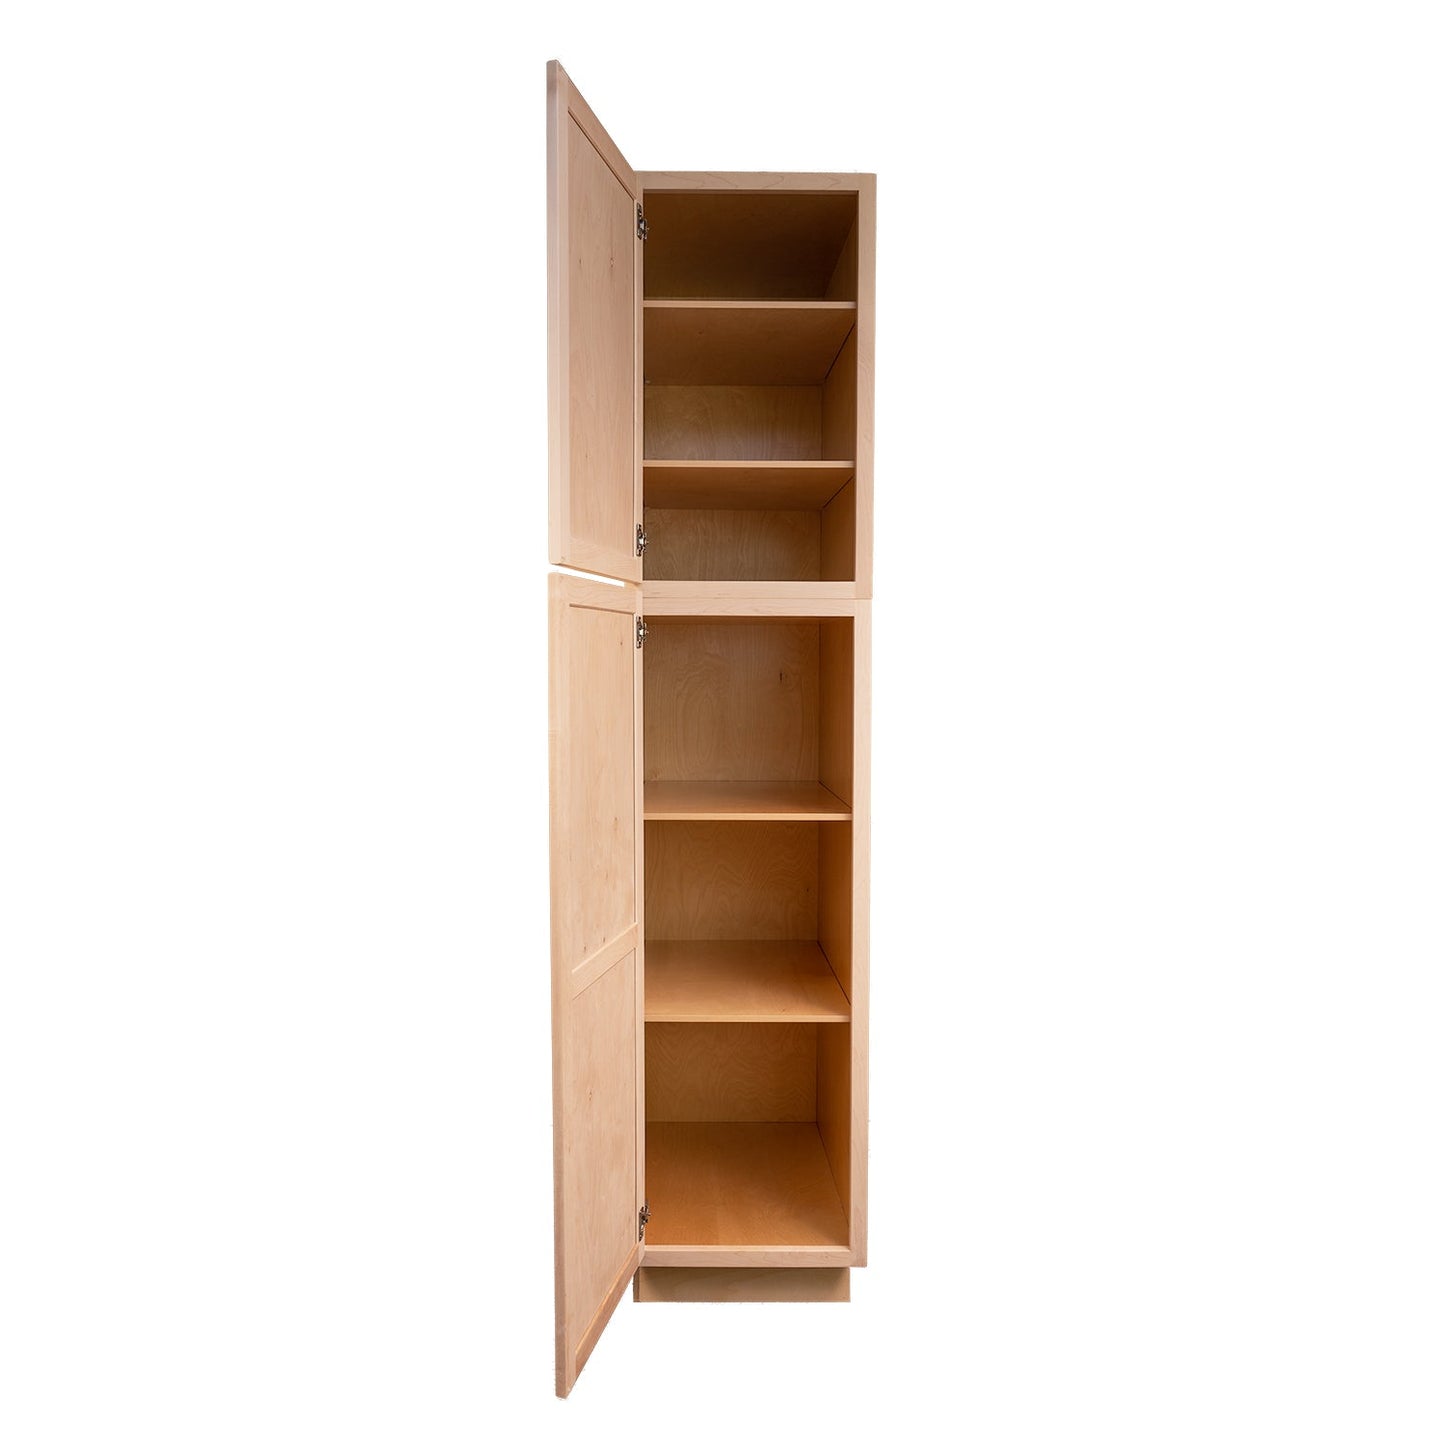 Quicklock RTA (Ready-to-Assemble) Raw Maple Pantry Cabinet 18"Wx90"Hx24"D